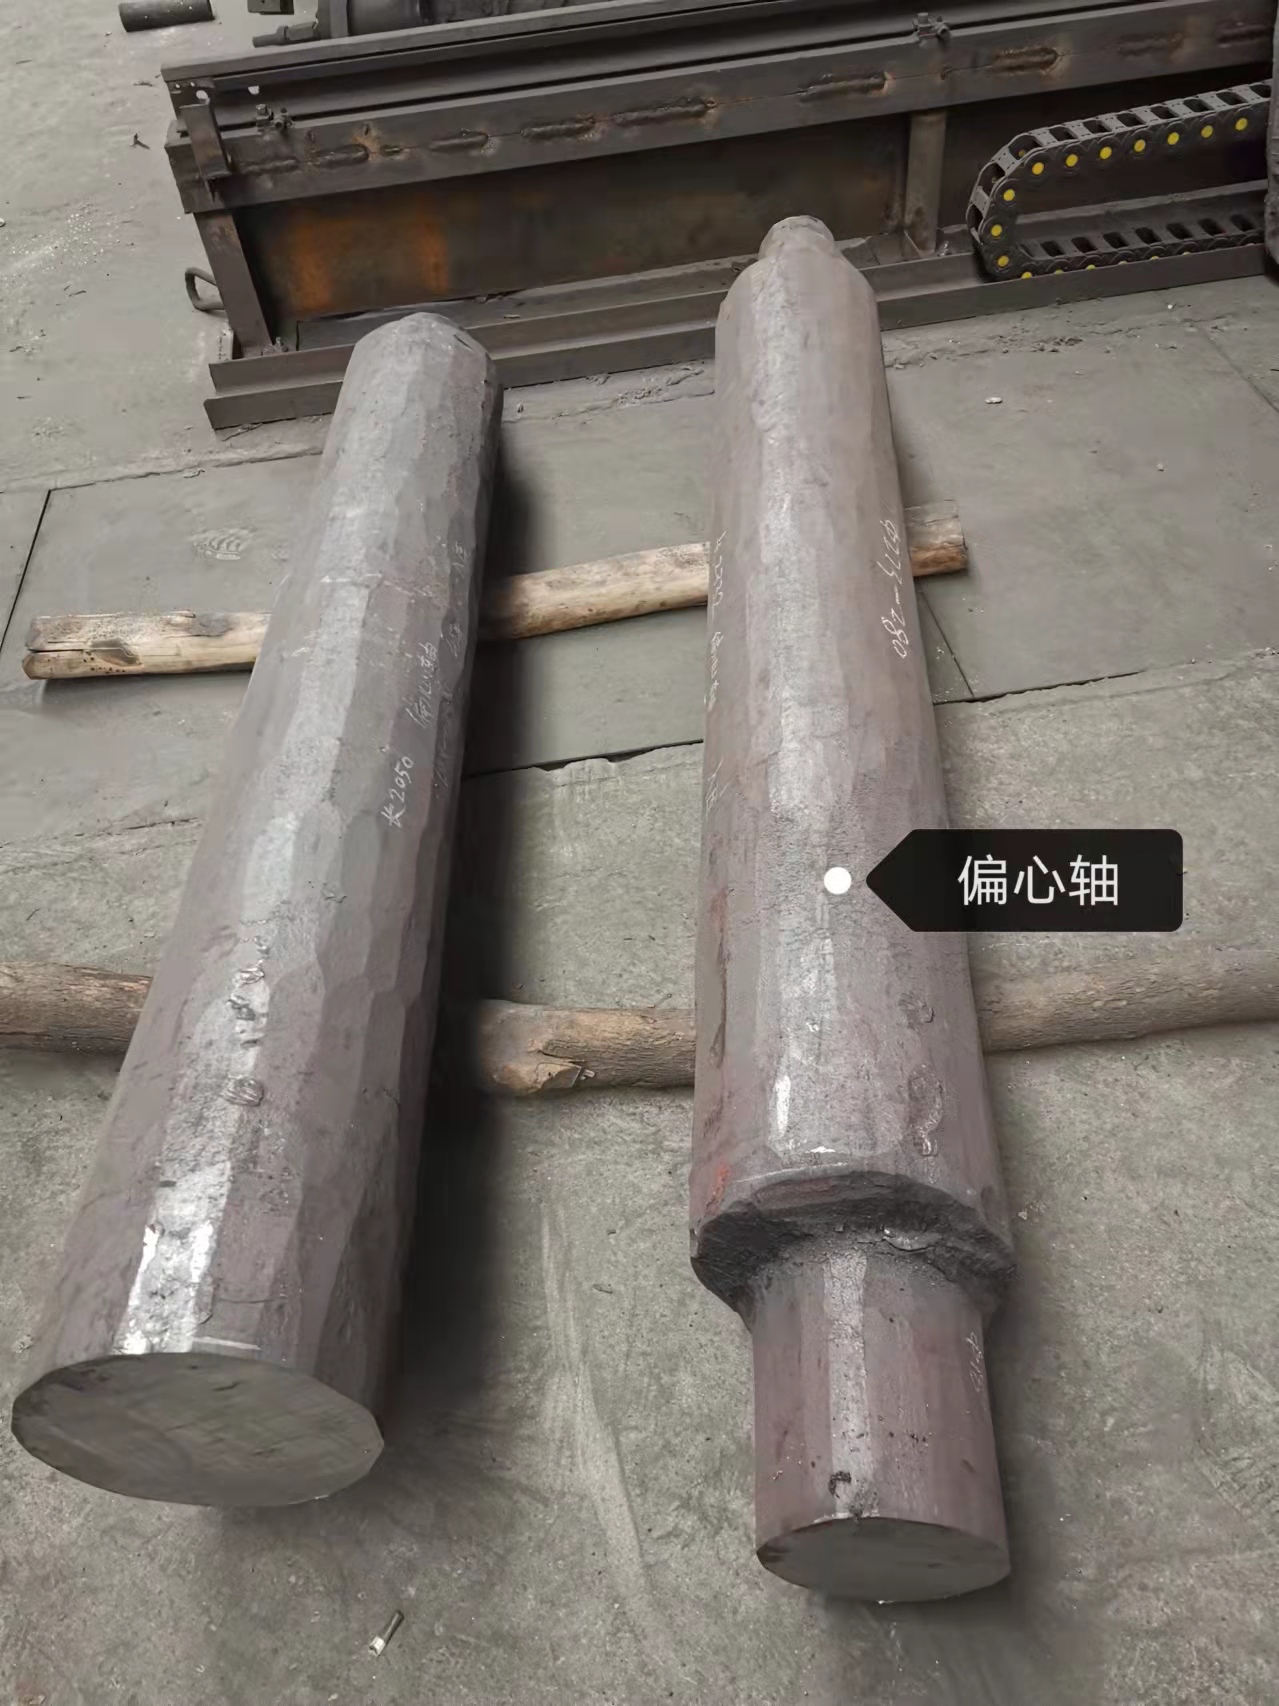 New process of shaft forging in forging works